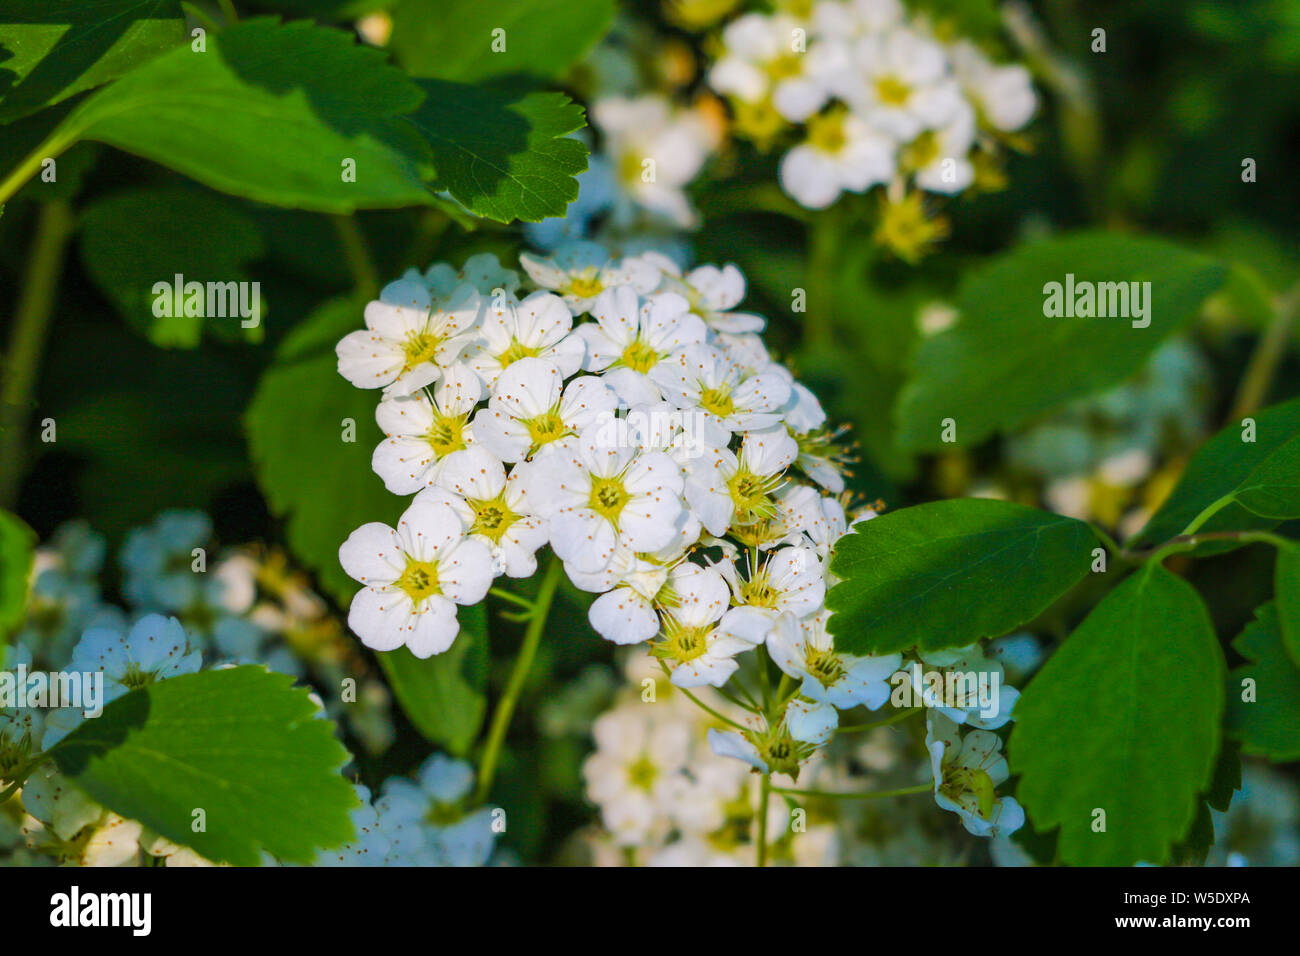 Cloth of gold Scientific name: Lantana camara L. yellow and white flower. Yellow and white Lantana flowers in the garden. flower picture for backgroun Stock Photo